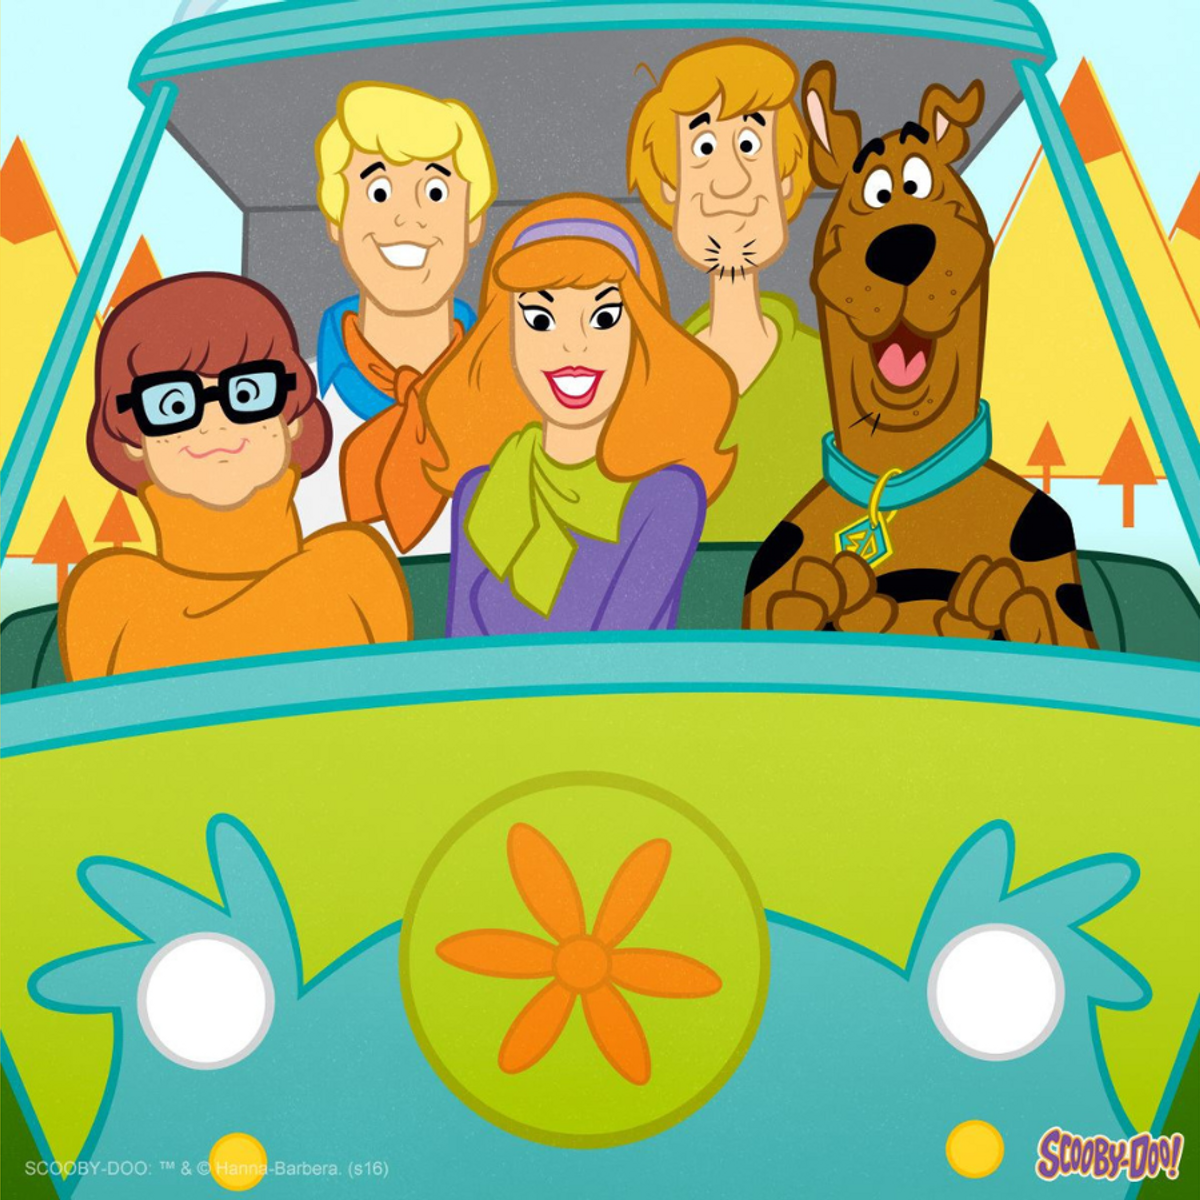 Do Scooby Doo Characters Represent Colleges in Eastern US?